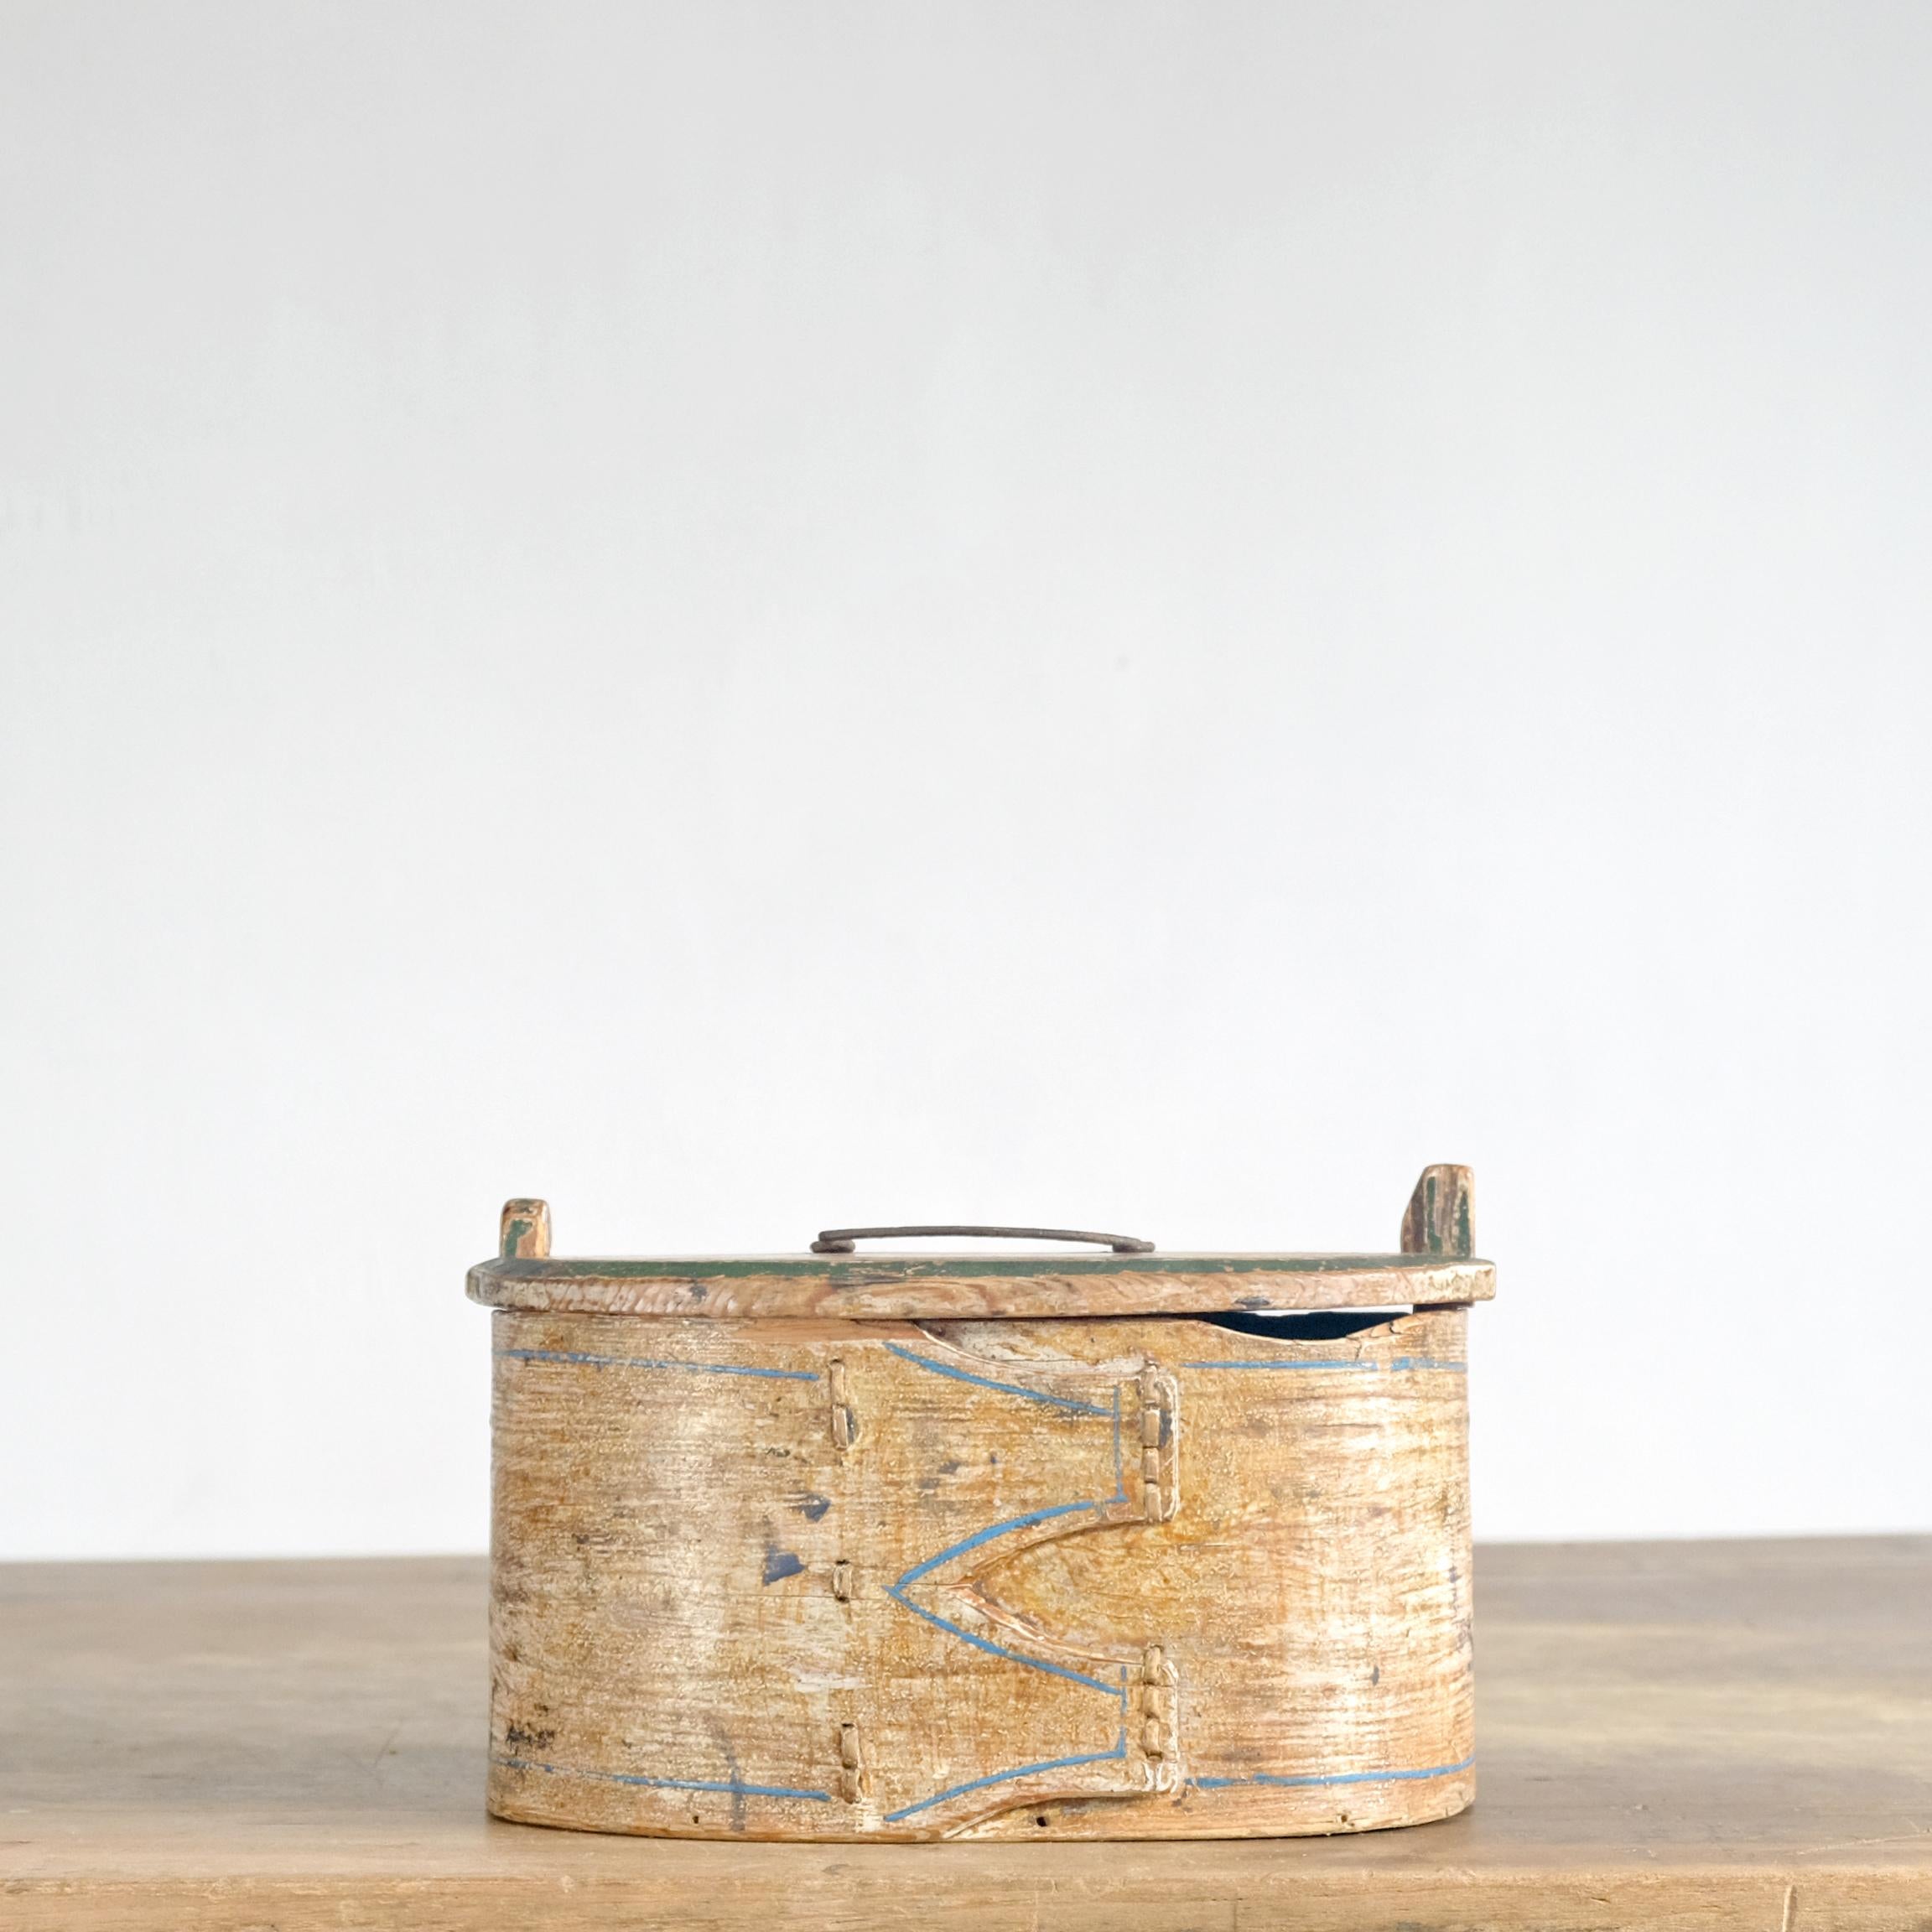 A 19th century Swedish Folk Art bentwood box with its original painted decoration. Used in the 18th and 19th centuries in Scandinavia, these boxes are constructed from a single piece of bentwood, stitched using roots or other natural fibres, with a